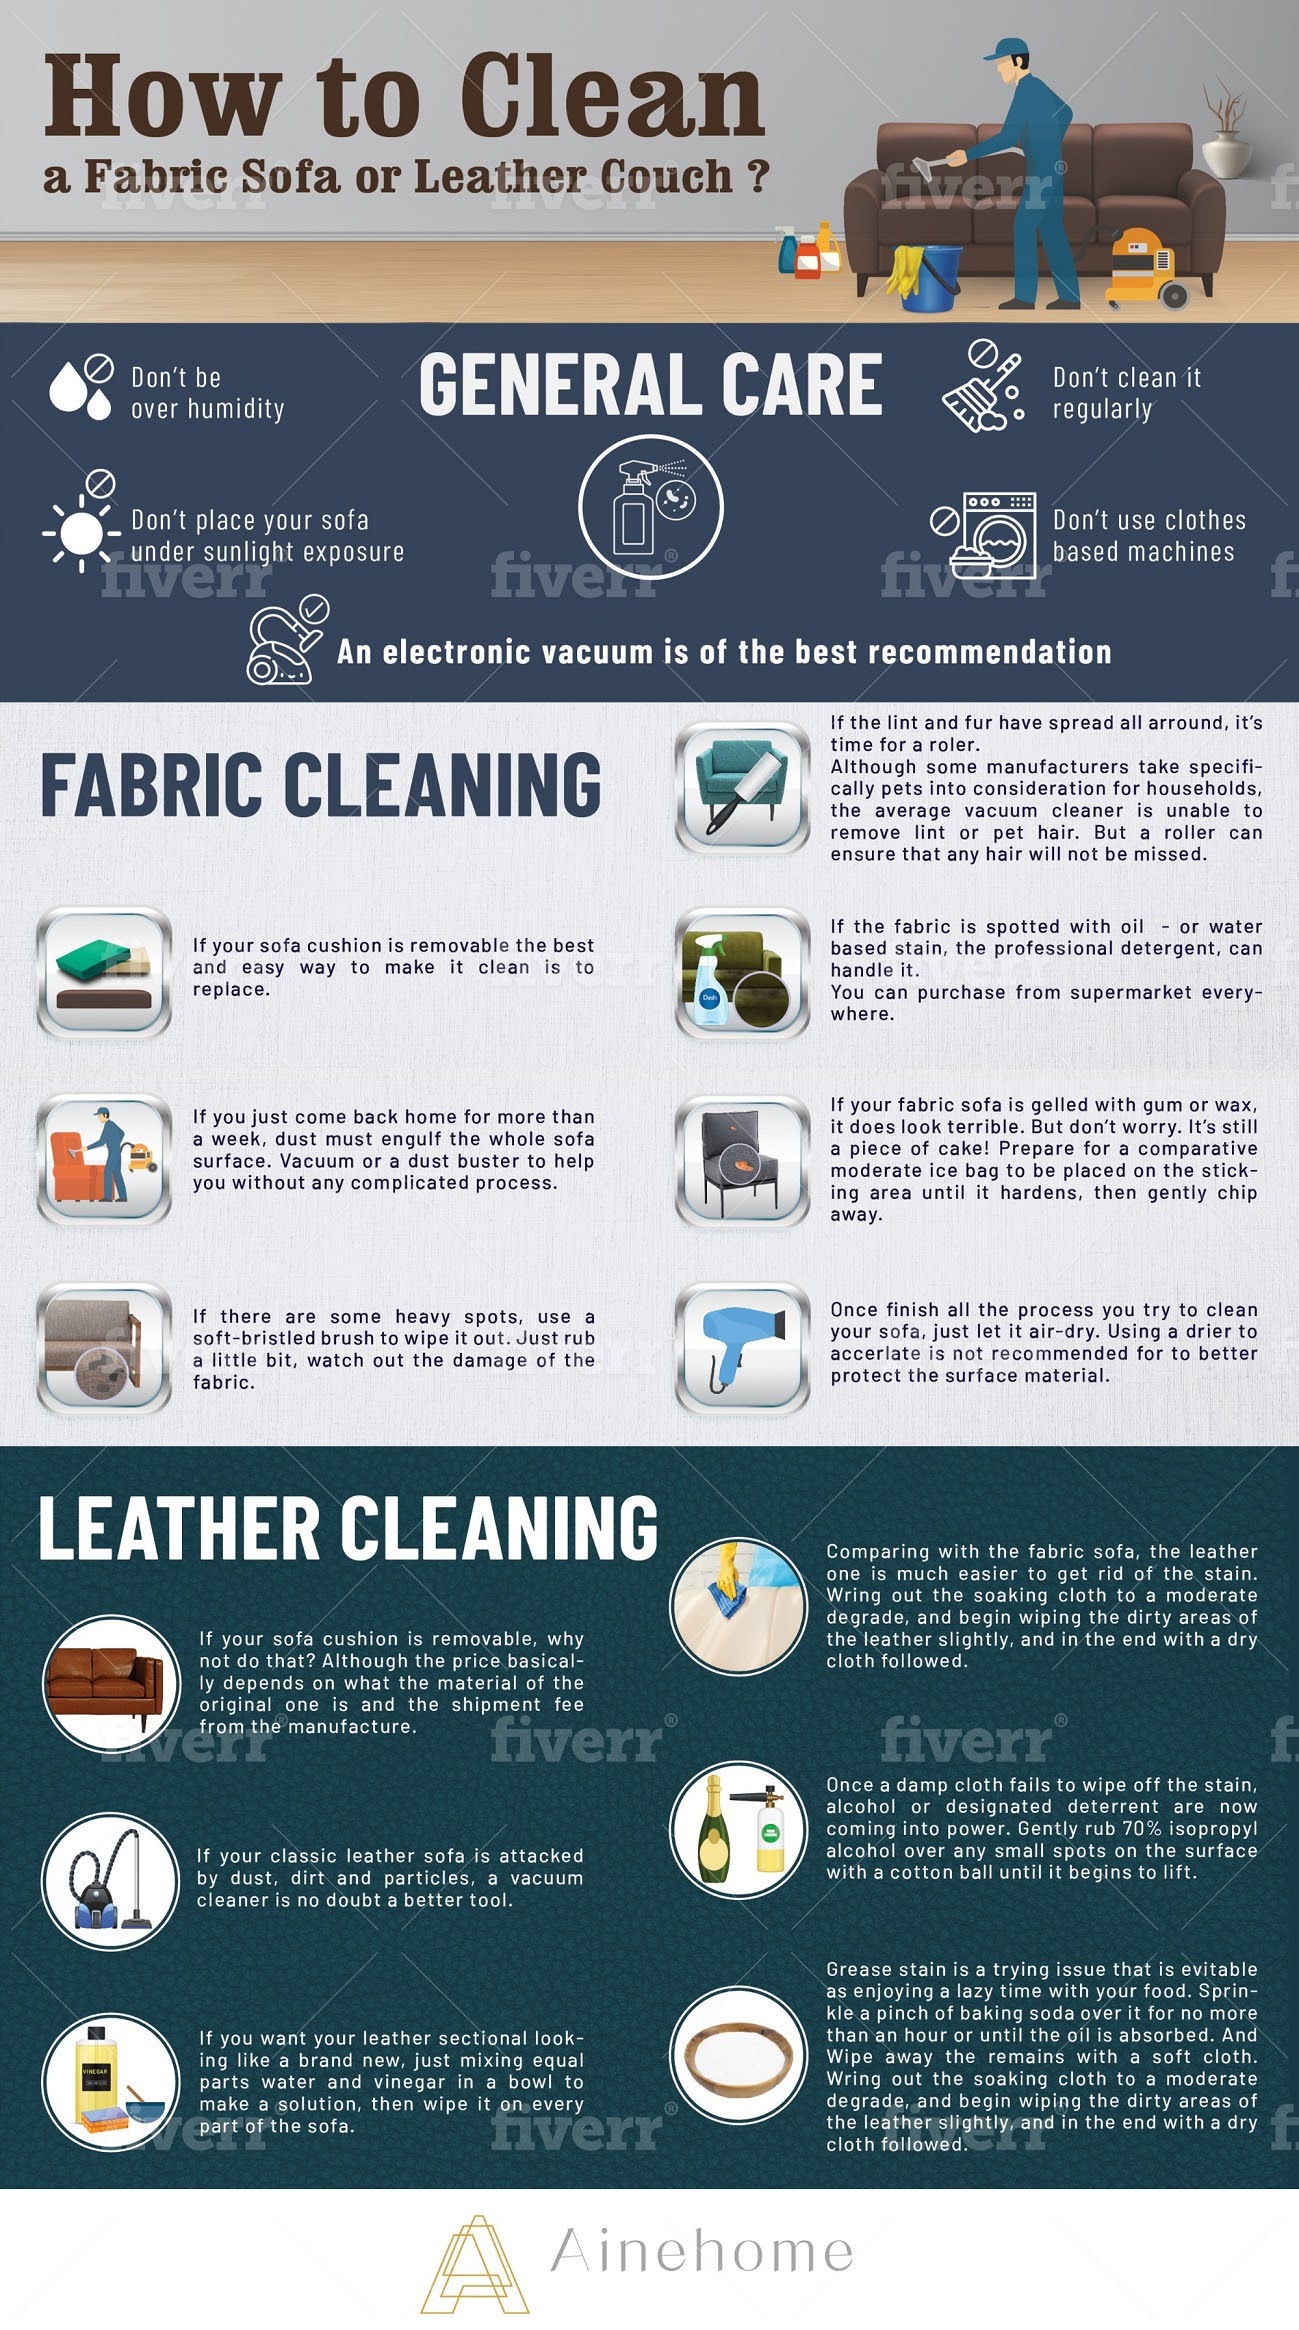 How to Clean a Fabric Sofa or Leather Couch? #infographic